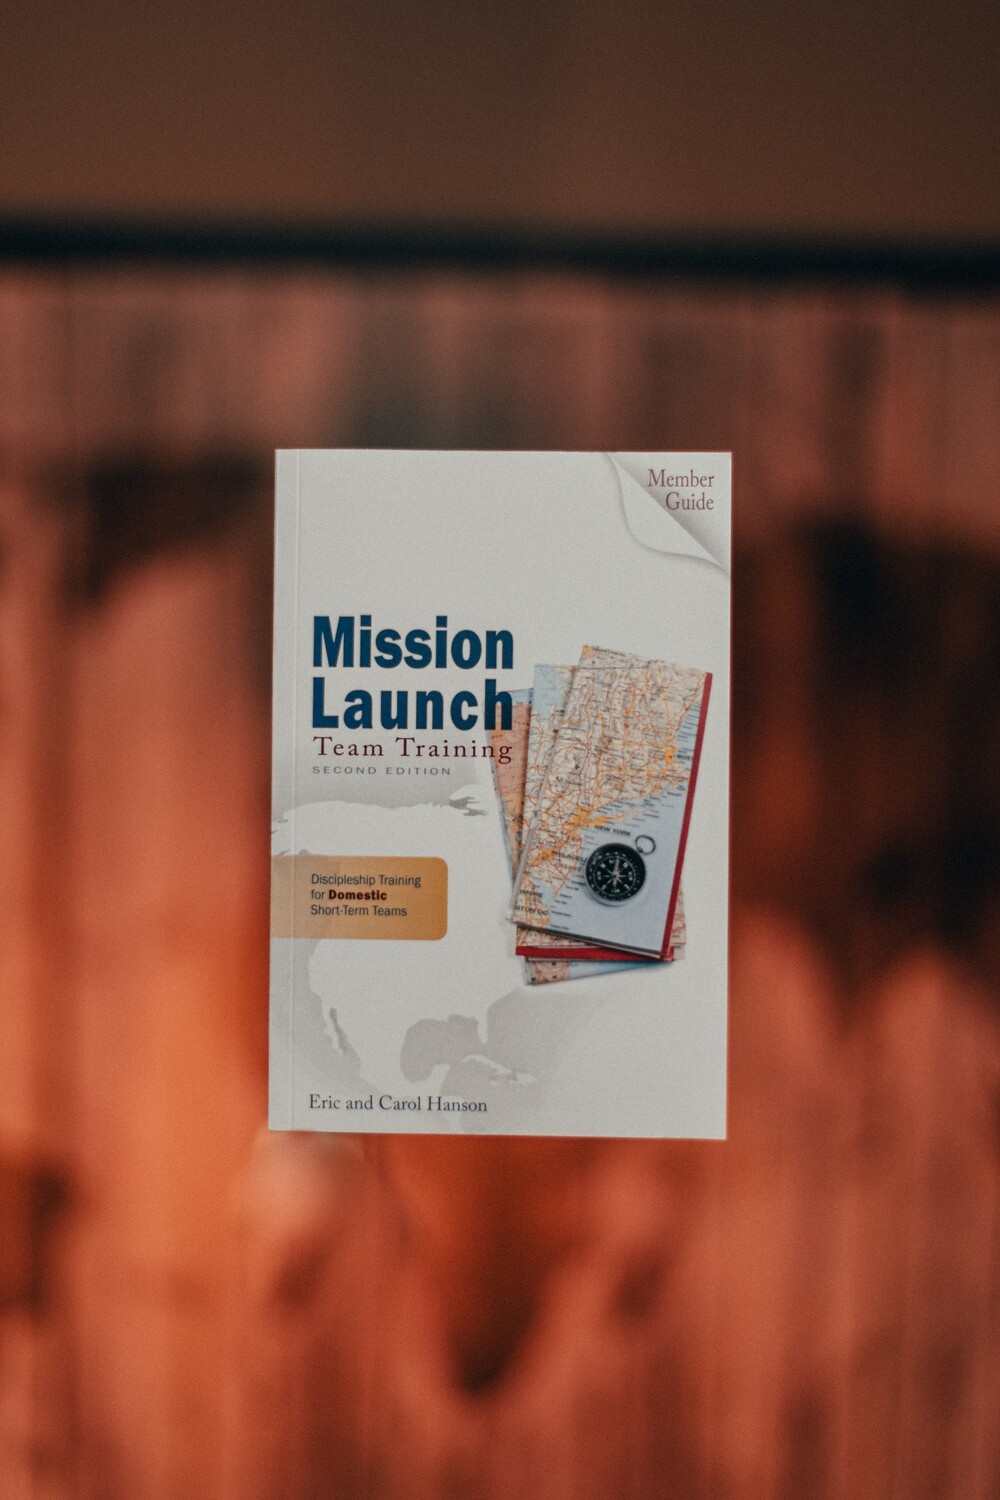 Mission Launch Team Training: Domestic Member Guide